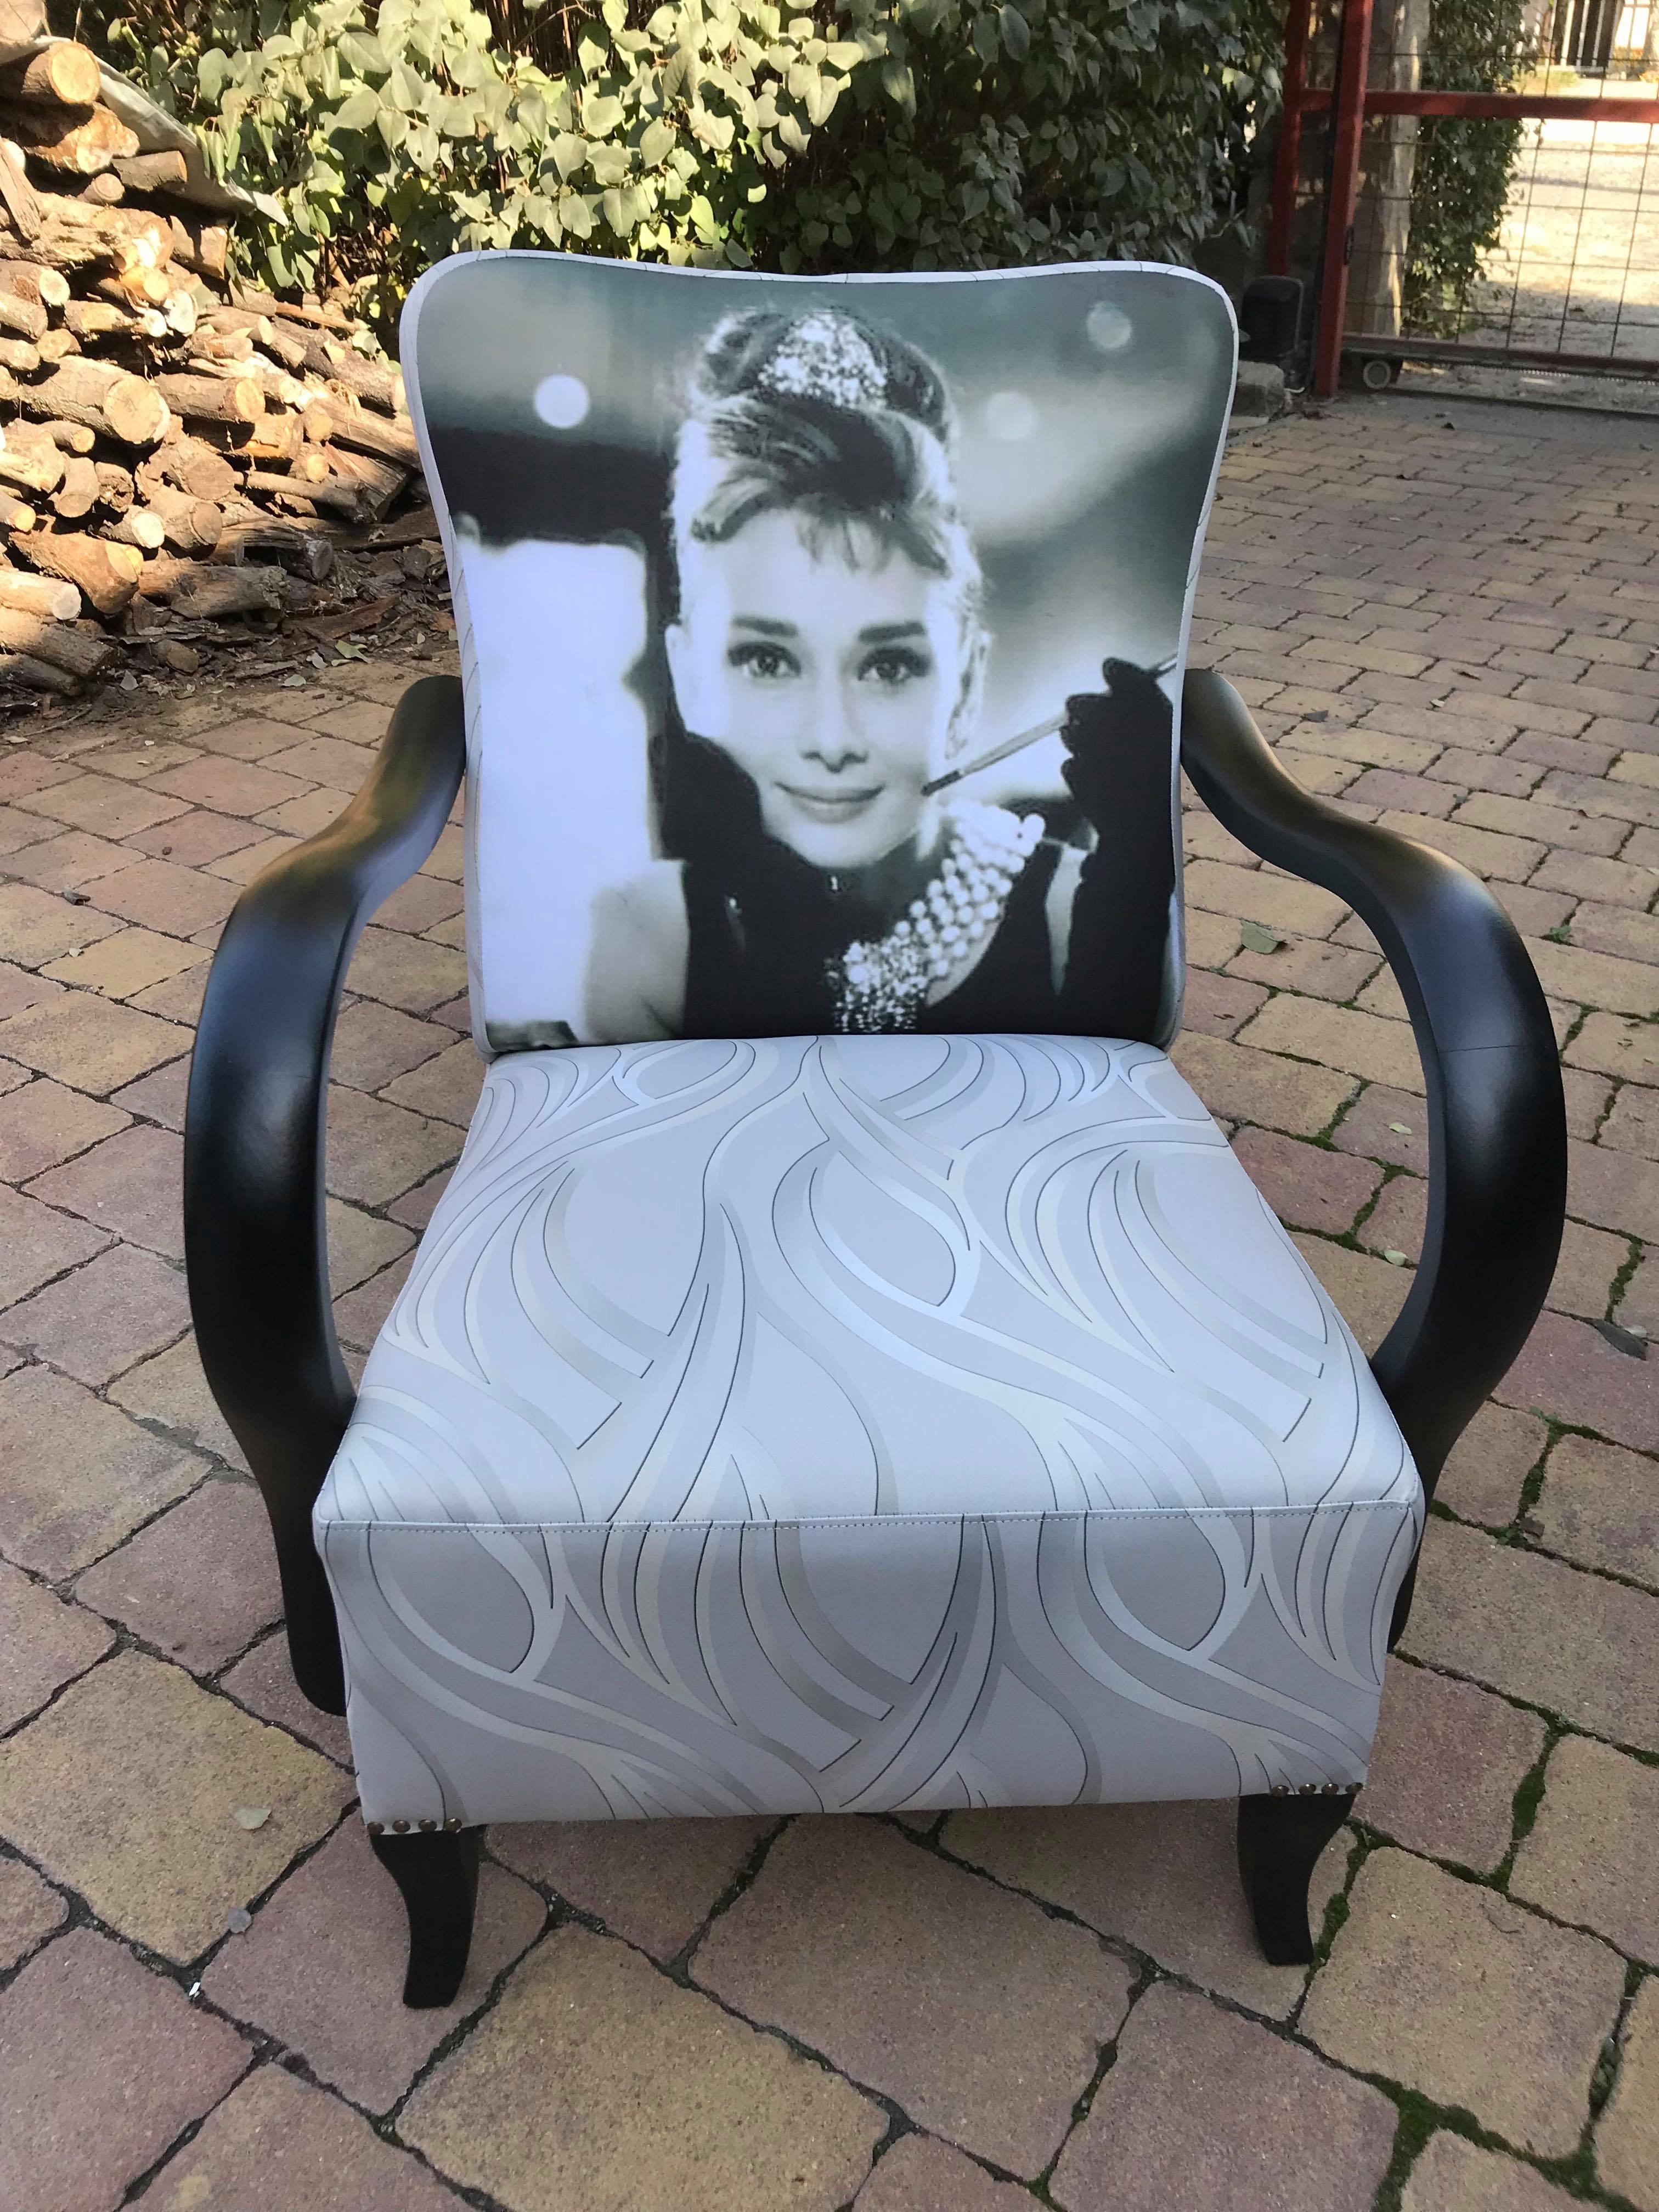 Art deco Audrey Hepburn Art Deco armchair, circa 1920s
 Restored and re-upholstered.
Lacquered, printed and hand colored.
They are period 1920s to 1930s art deco chairs, they are not reproduction or 'in the style of', these are the real thing!